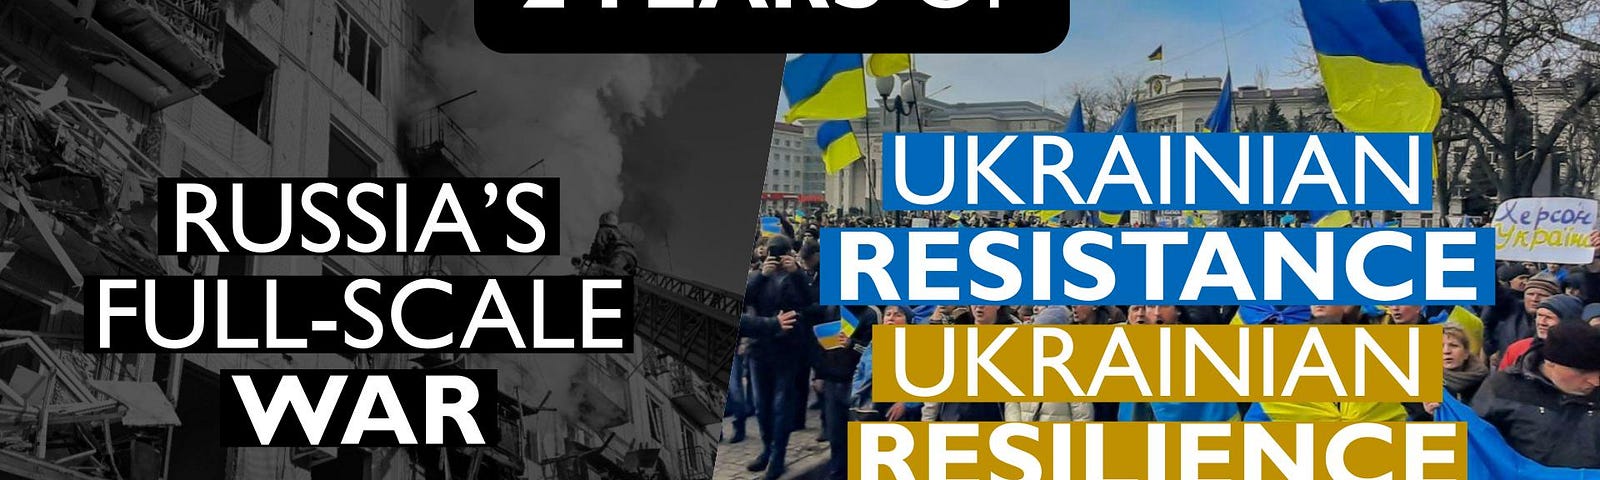 A pair of images headlined with “2 YEARS OF.” On the left: a black and white image of a building with smoke coming out of it because it was bombed overlaid with the words “RUSSIA’S FULL-SCALE WAR.” On the right, a color photo of people holding blue and yellow flags overlaid with the words “UKRAINIAN RESISTANCE UKRANIAN RESILIENCE.”